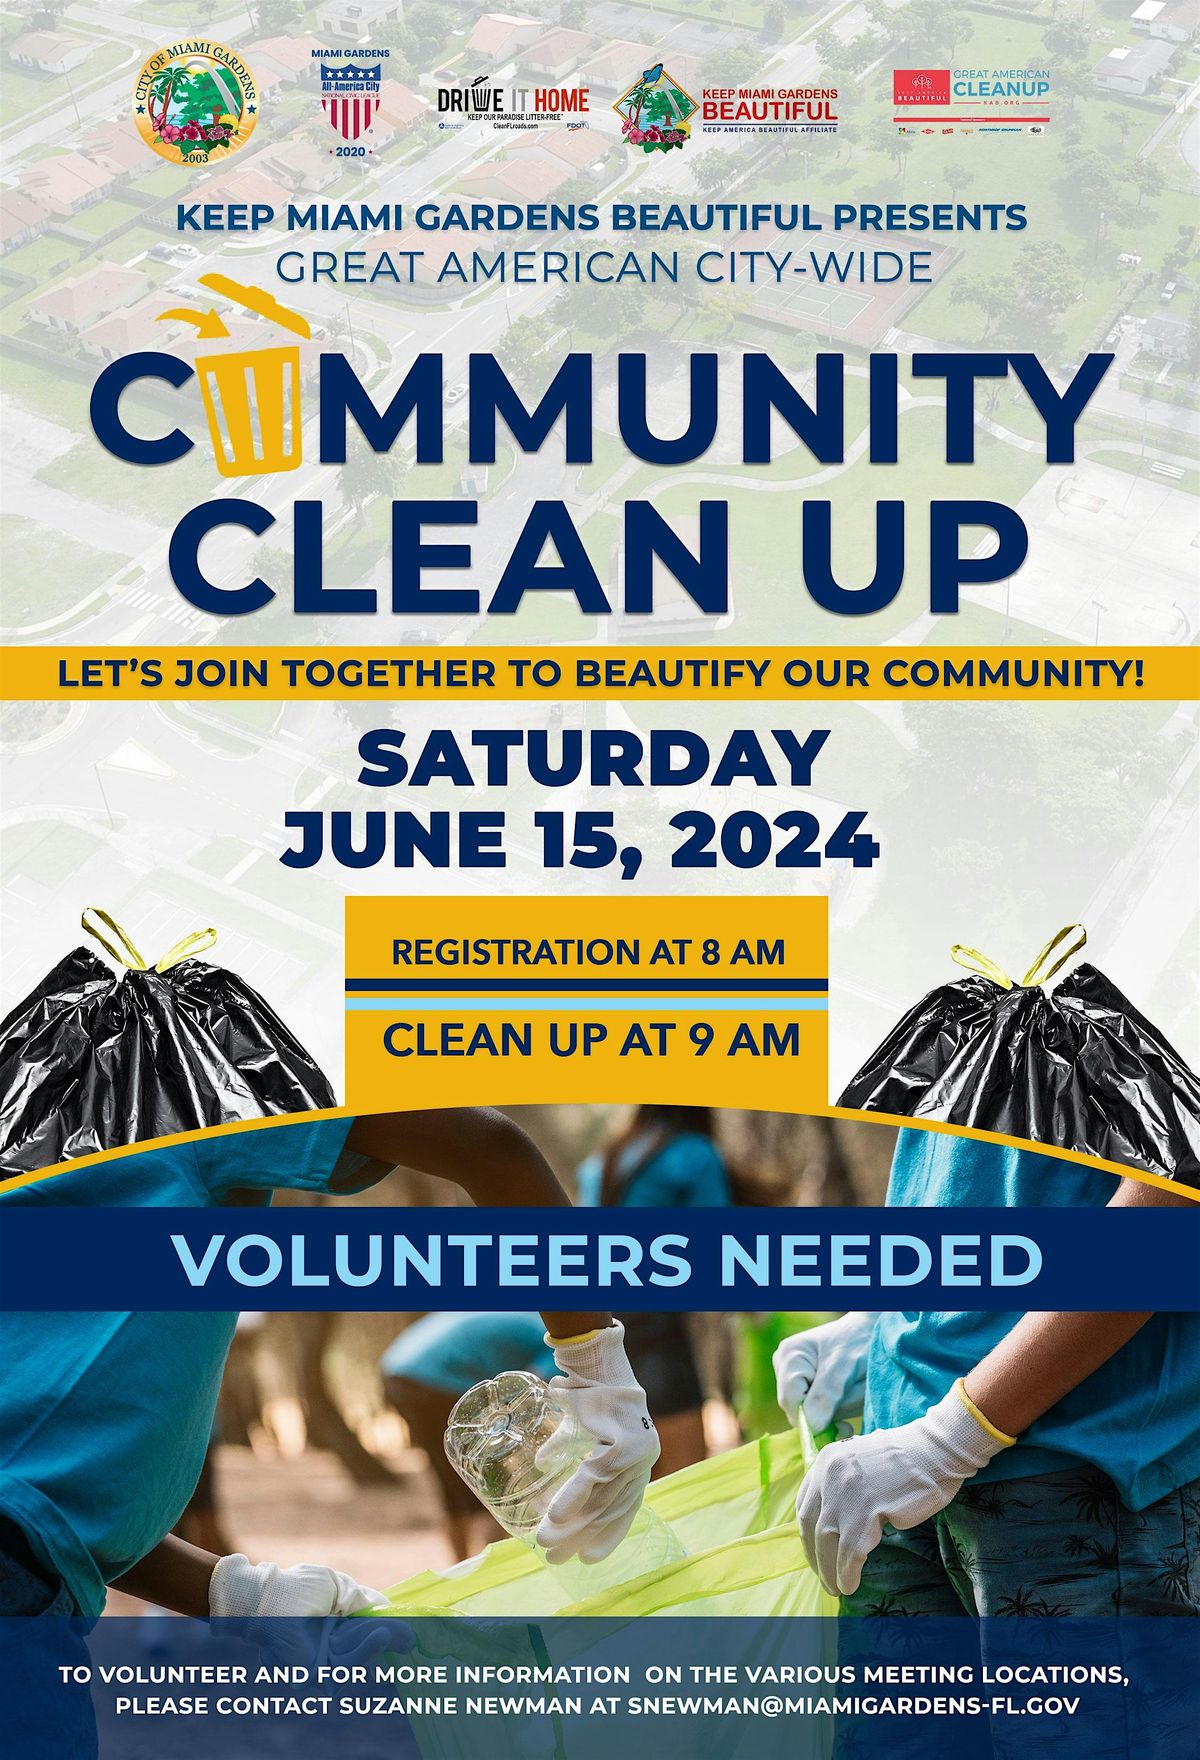 Great American City-wide Community Cleanup